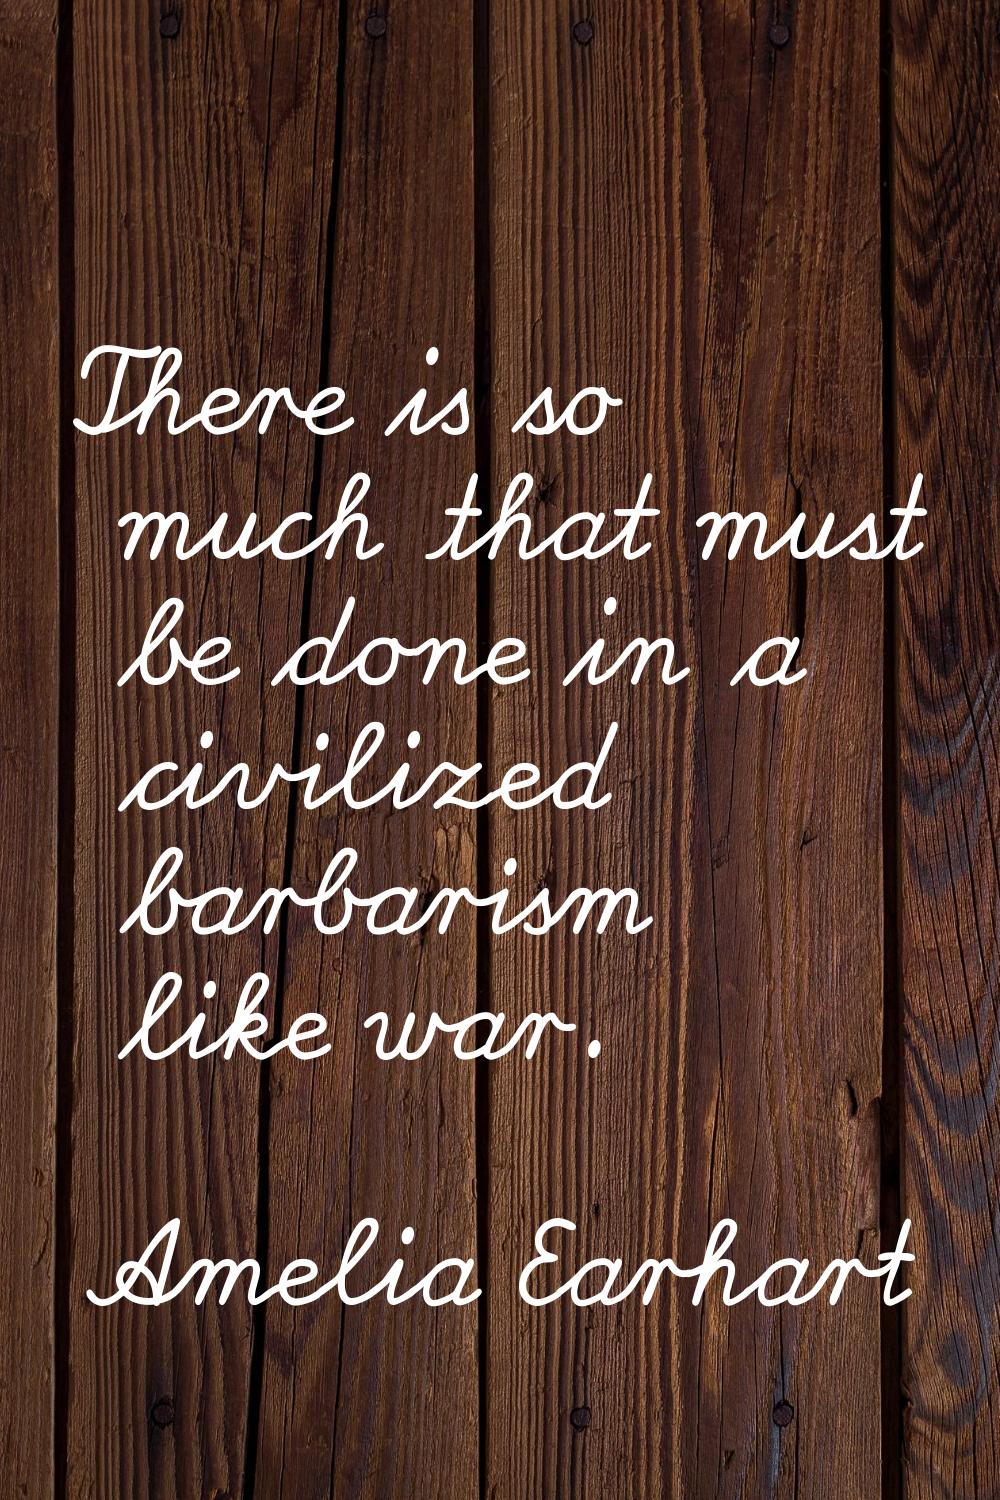 There is so much that must be done in a civilized barbarism like war.